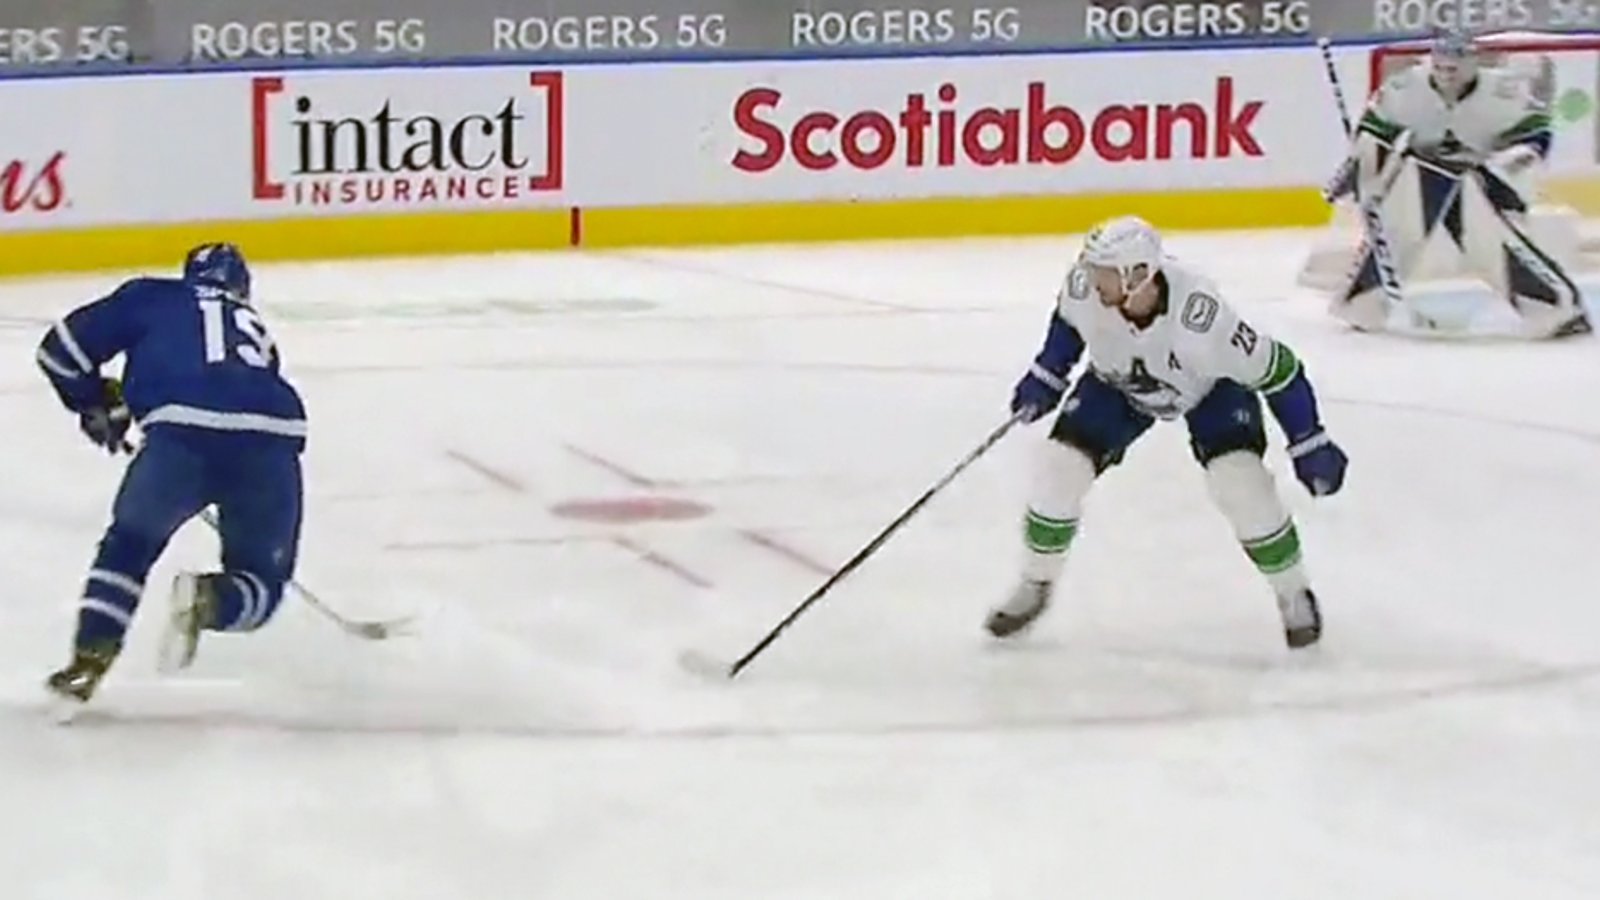 Spezza scores the 8th hat trick of his career with an absolute beauty!